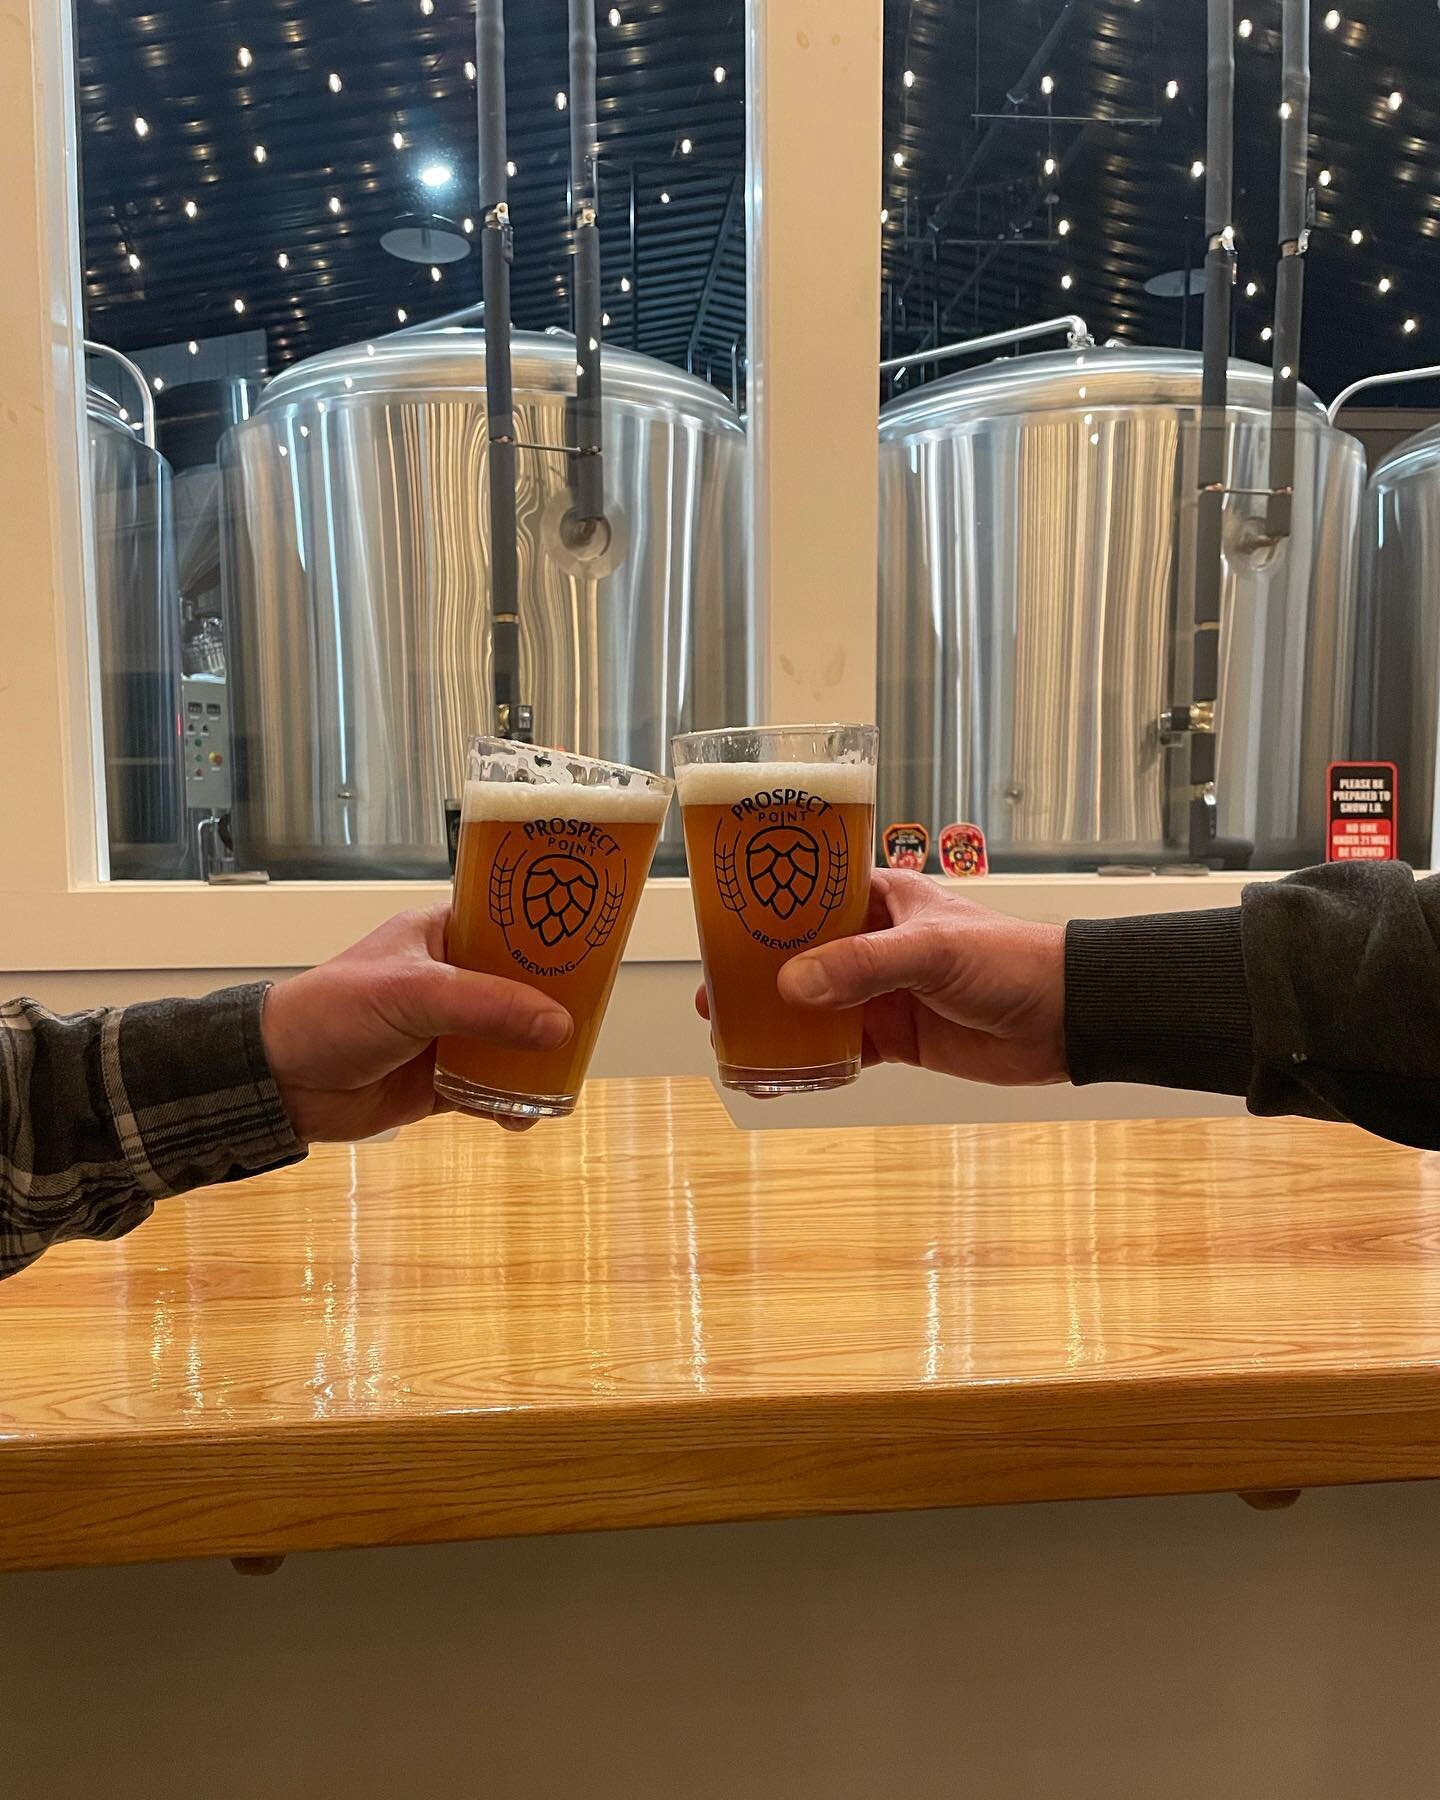 Cheers! It&rsquo;s Thursday and we open at 3 today with $5 pours!

Thursday, 1/12 Hours 3-7
All pours $5

Friday, 1/13 Hours 3-9
Food @laparadafr 
Music @sticksandstonesmd 6-9
Fire pit rentals available $30

Saturday, 1/14 Hours 12-9
Food @lacarreta_